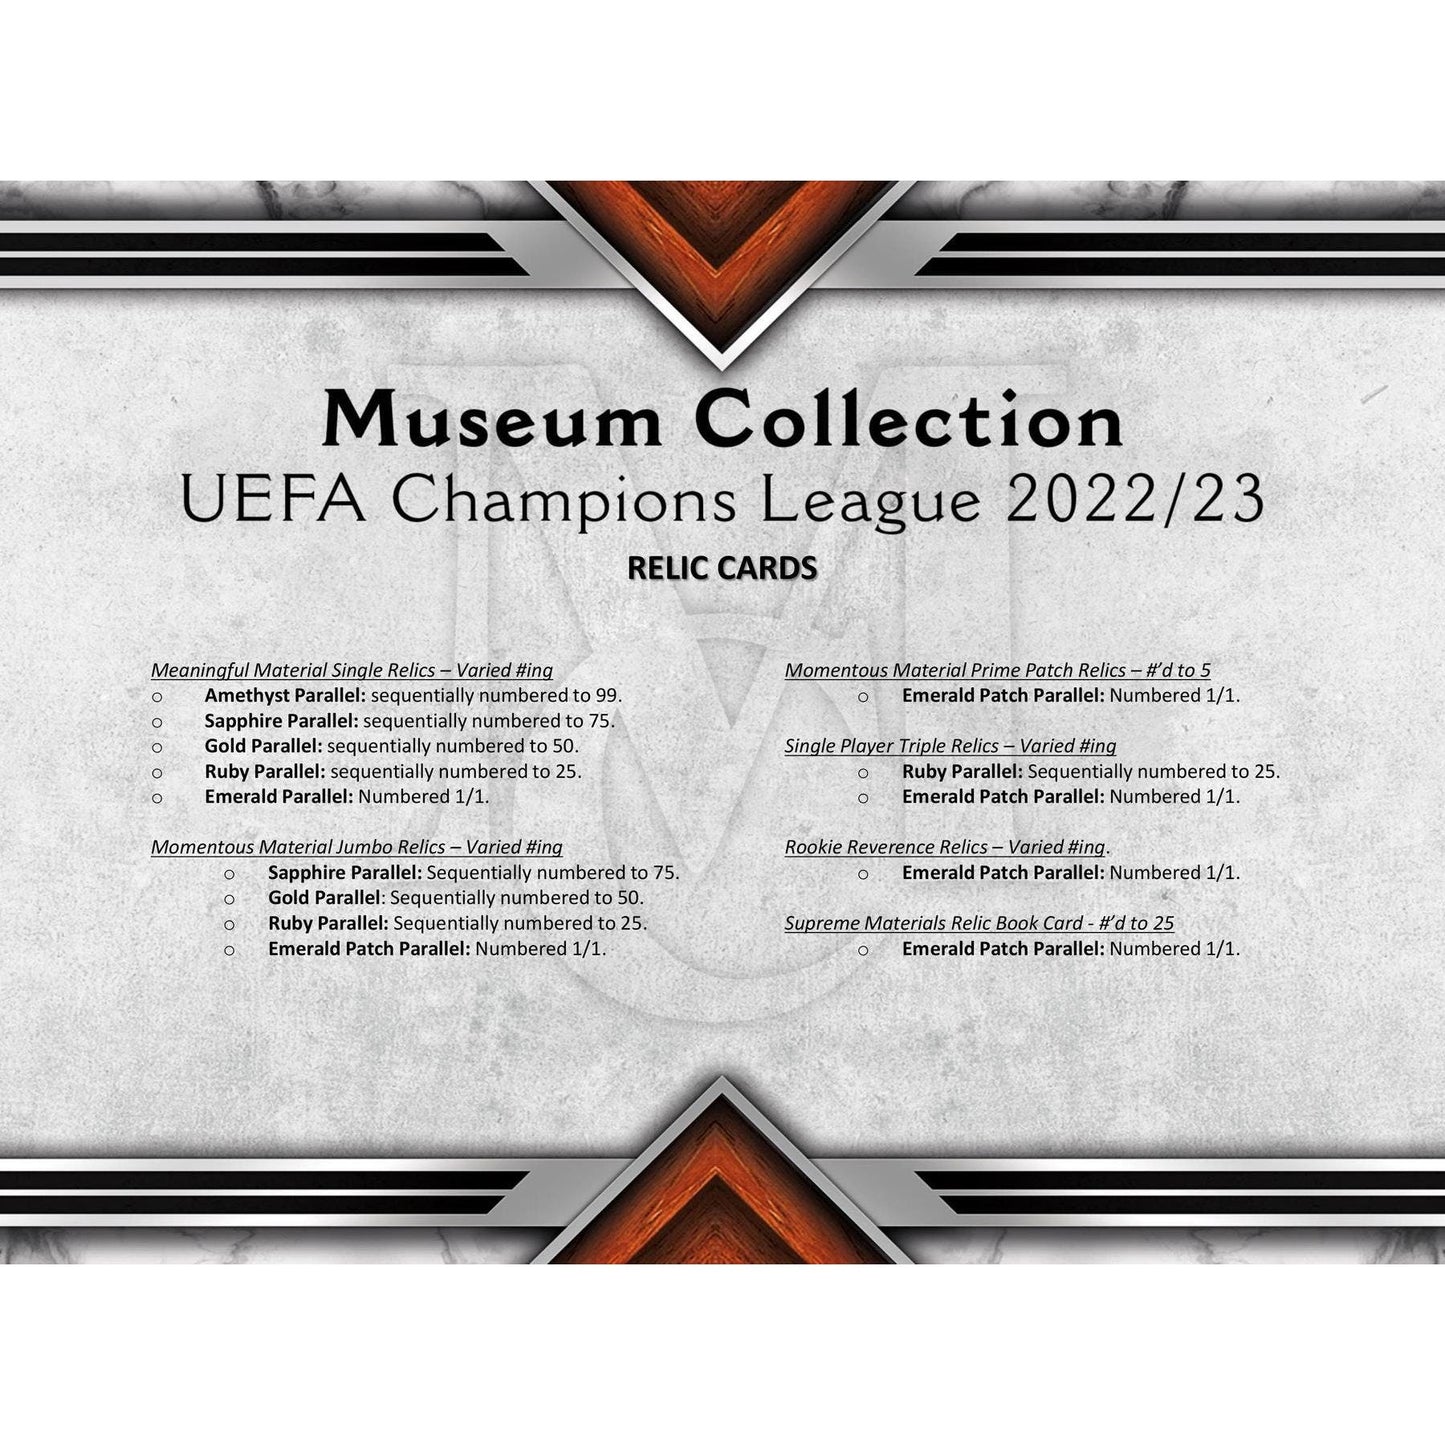 2022-23 Topps Museum Collection UEFA Champions League Soccer Hobby Box 887521117024 - King Card Canada